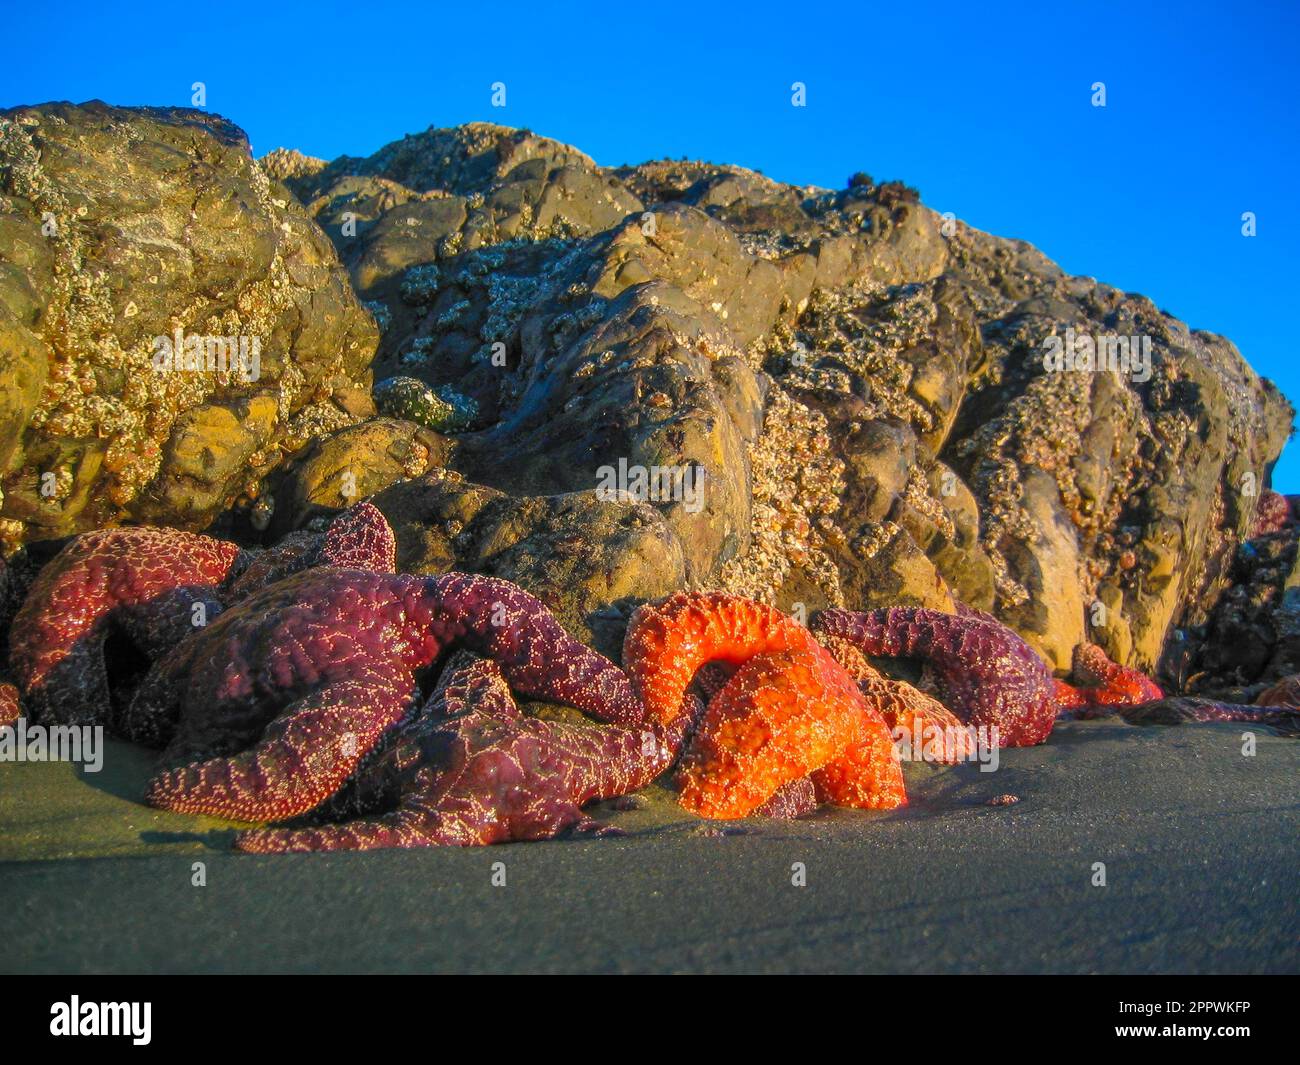 Close-up of a row of Starfish on a beach at Low Tide, British Columbia, Canada Stock Photo